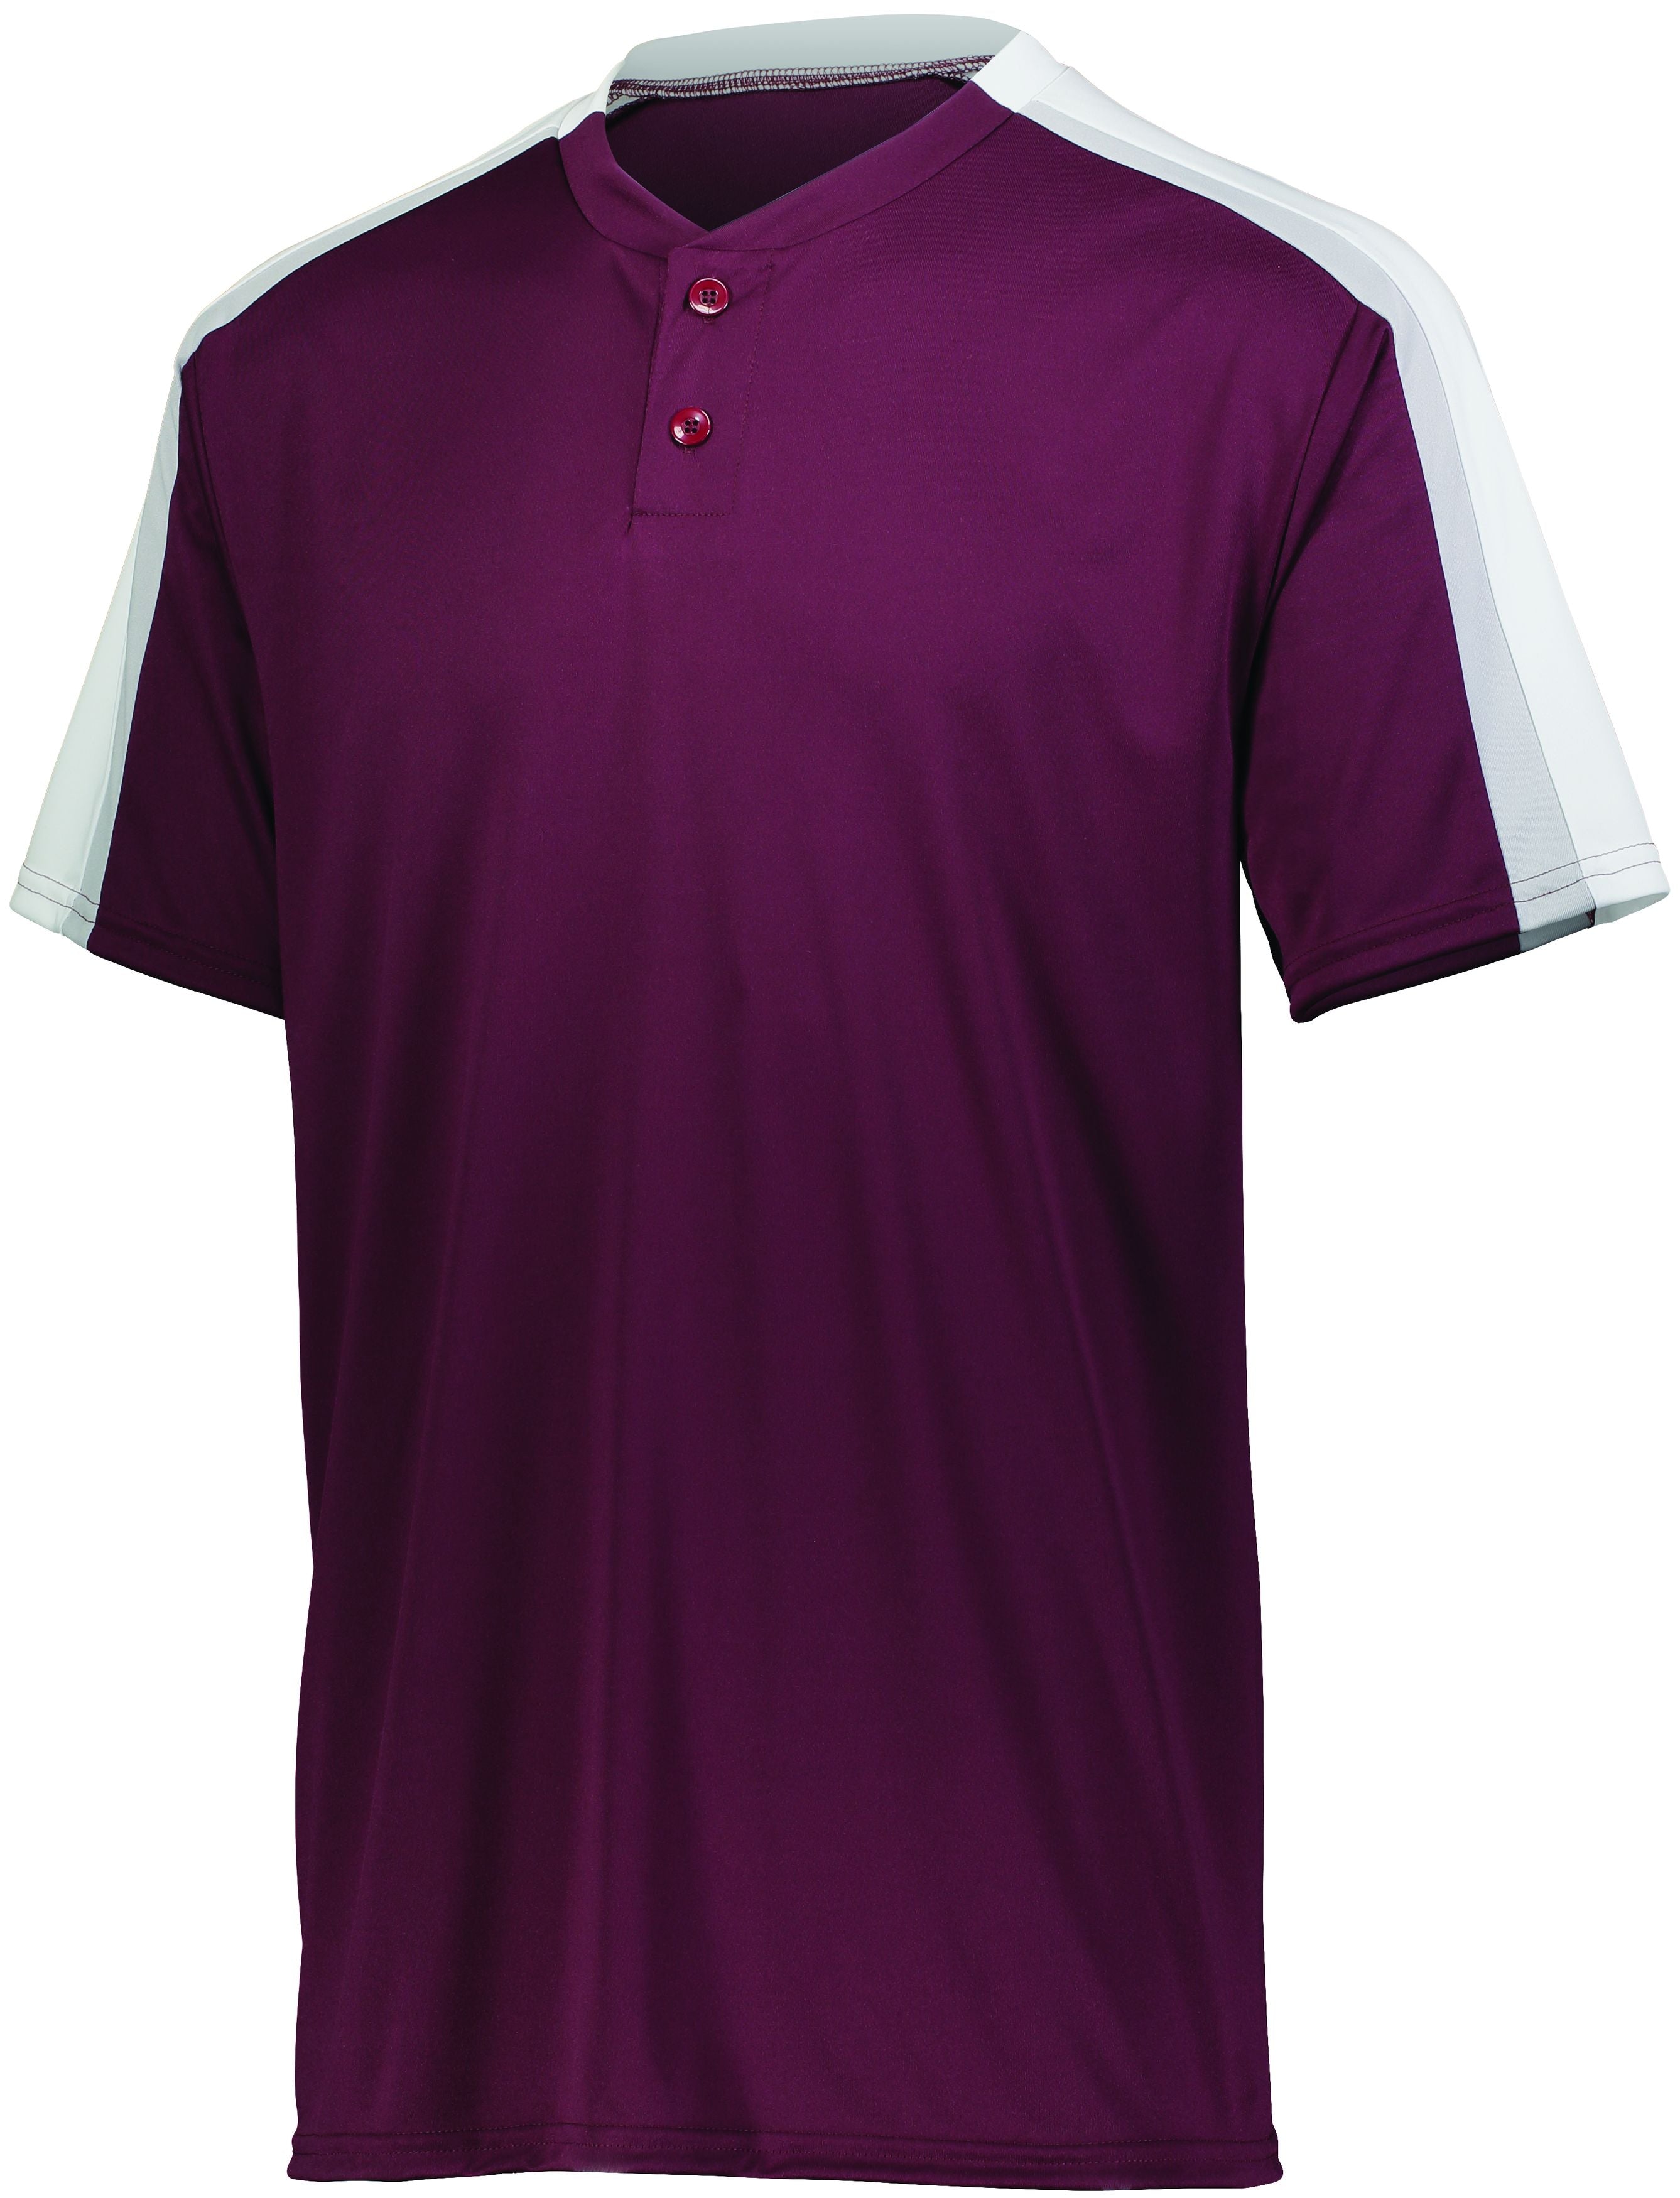 Augusta Sportswear Power Plus Jersey 2.0 in Maroon/White/Silver Grey  -Part of the Adult, Adult-Jersey, Augusta-Products, Baseball, Shirts, All-Sports, All-Sports-1 product lines at KanaleyCreations.com